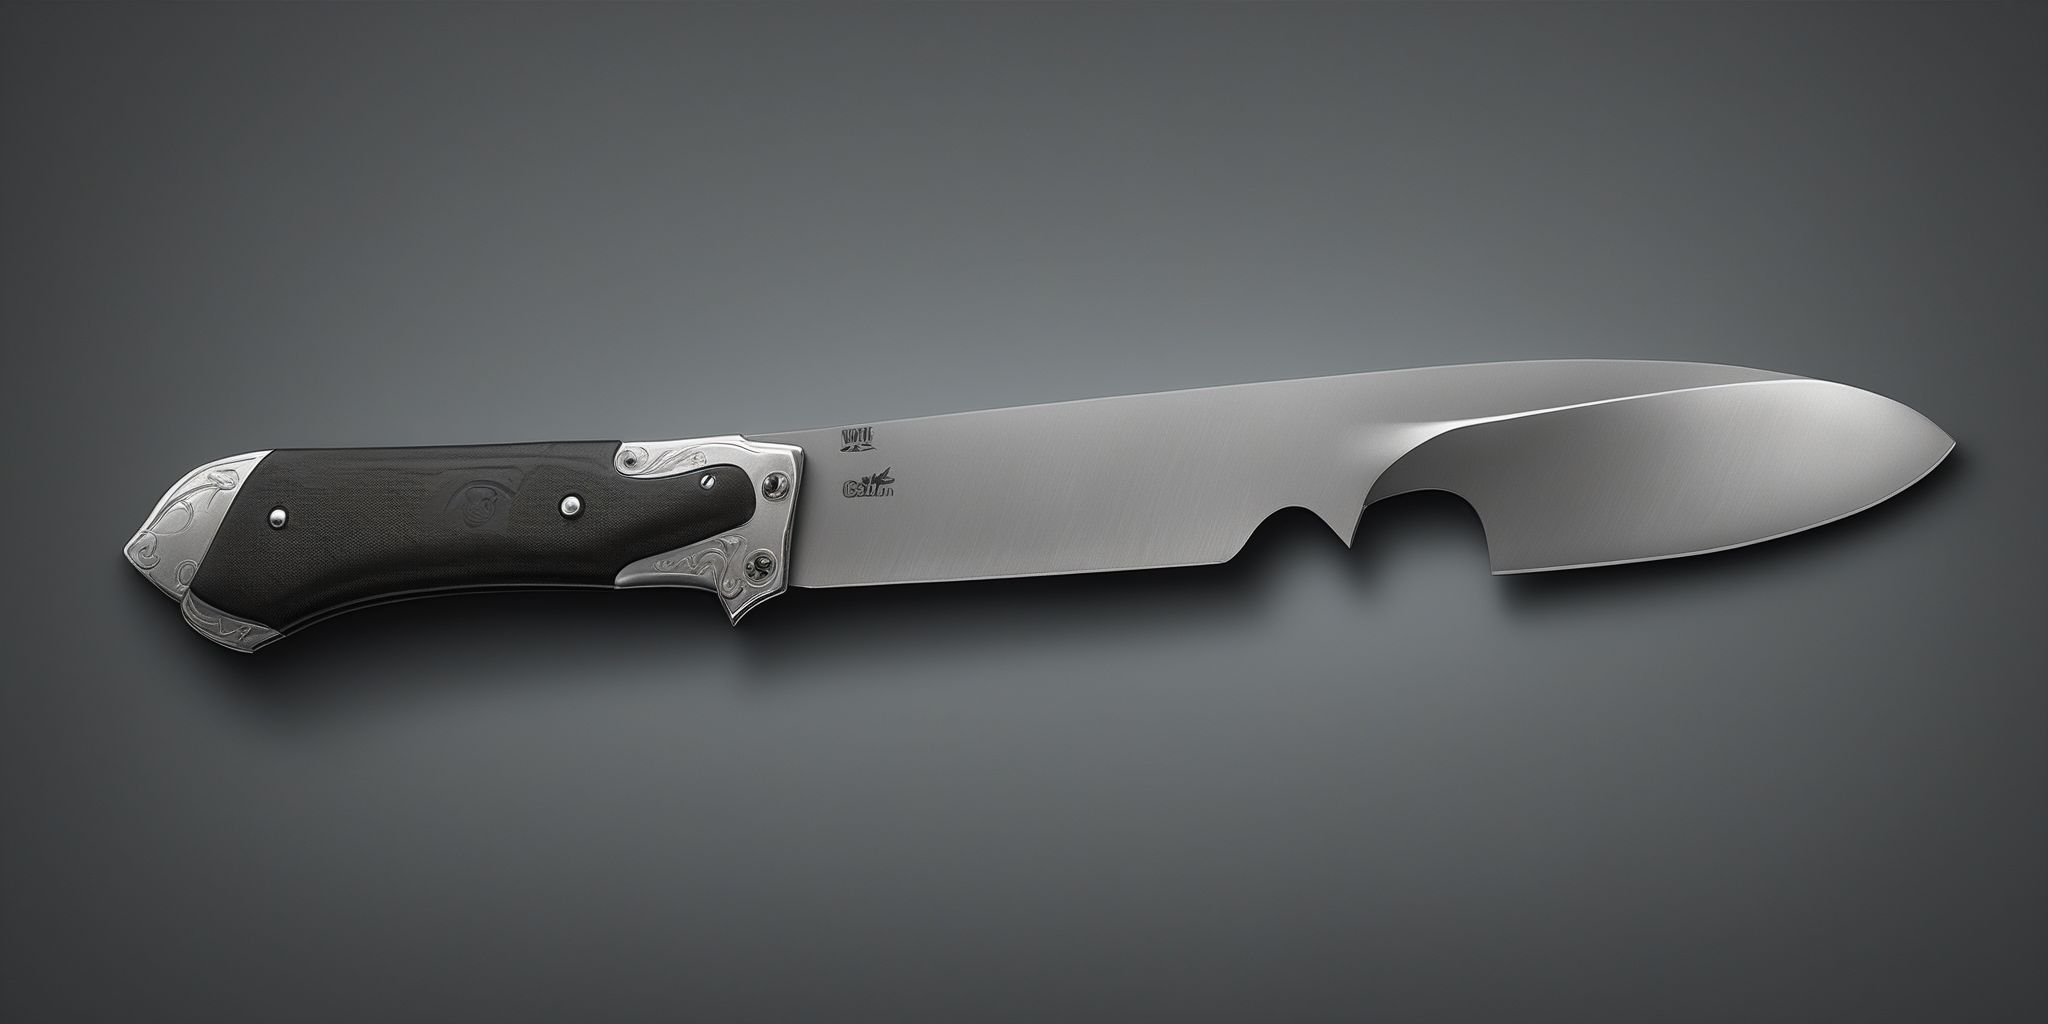 Blade  in realistic, photographic style